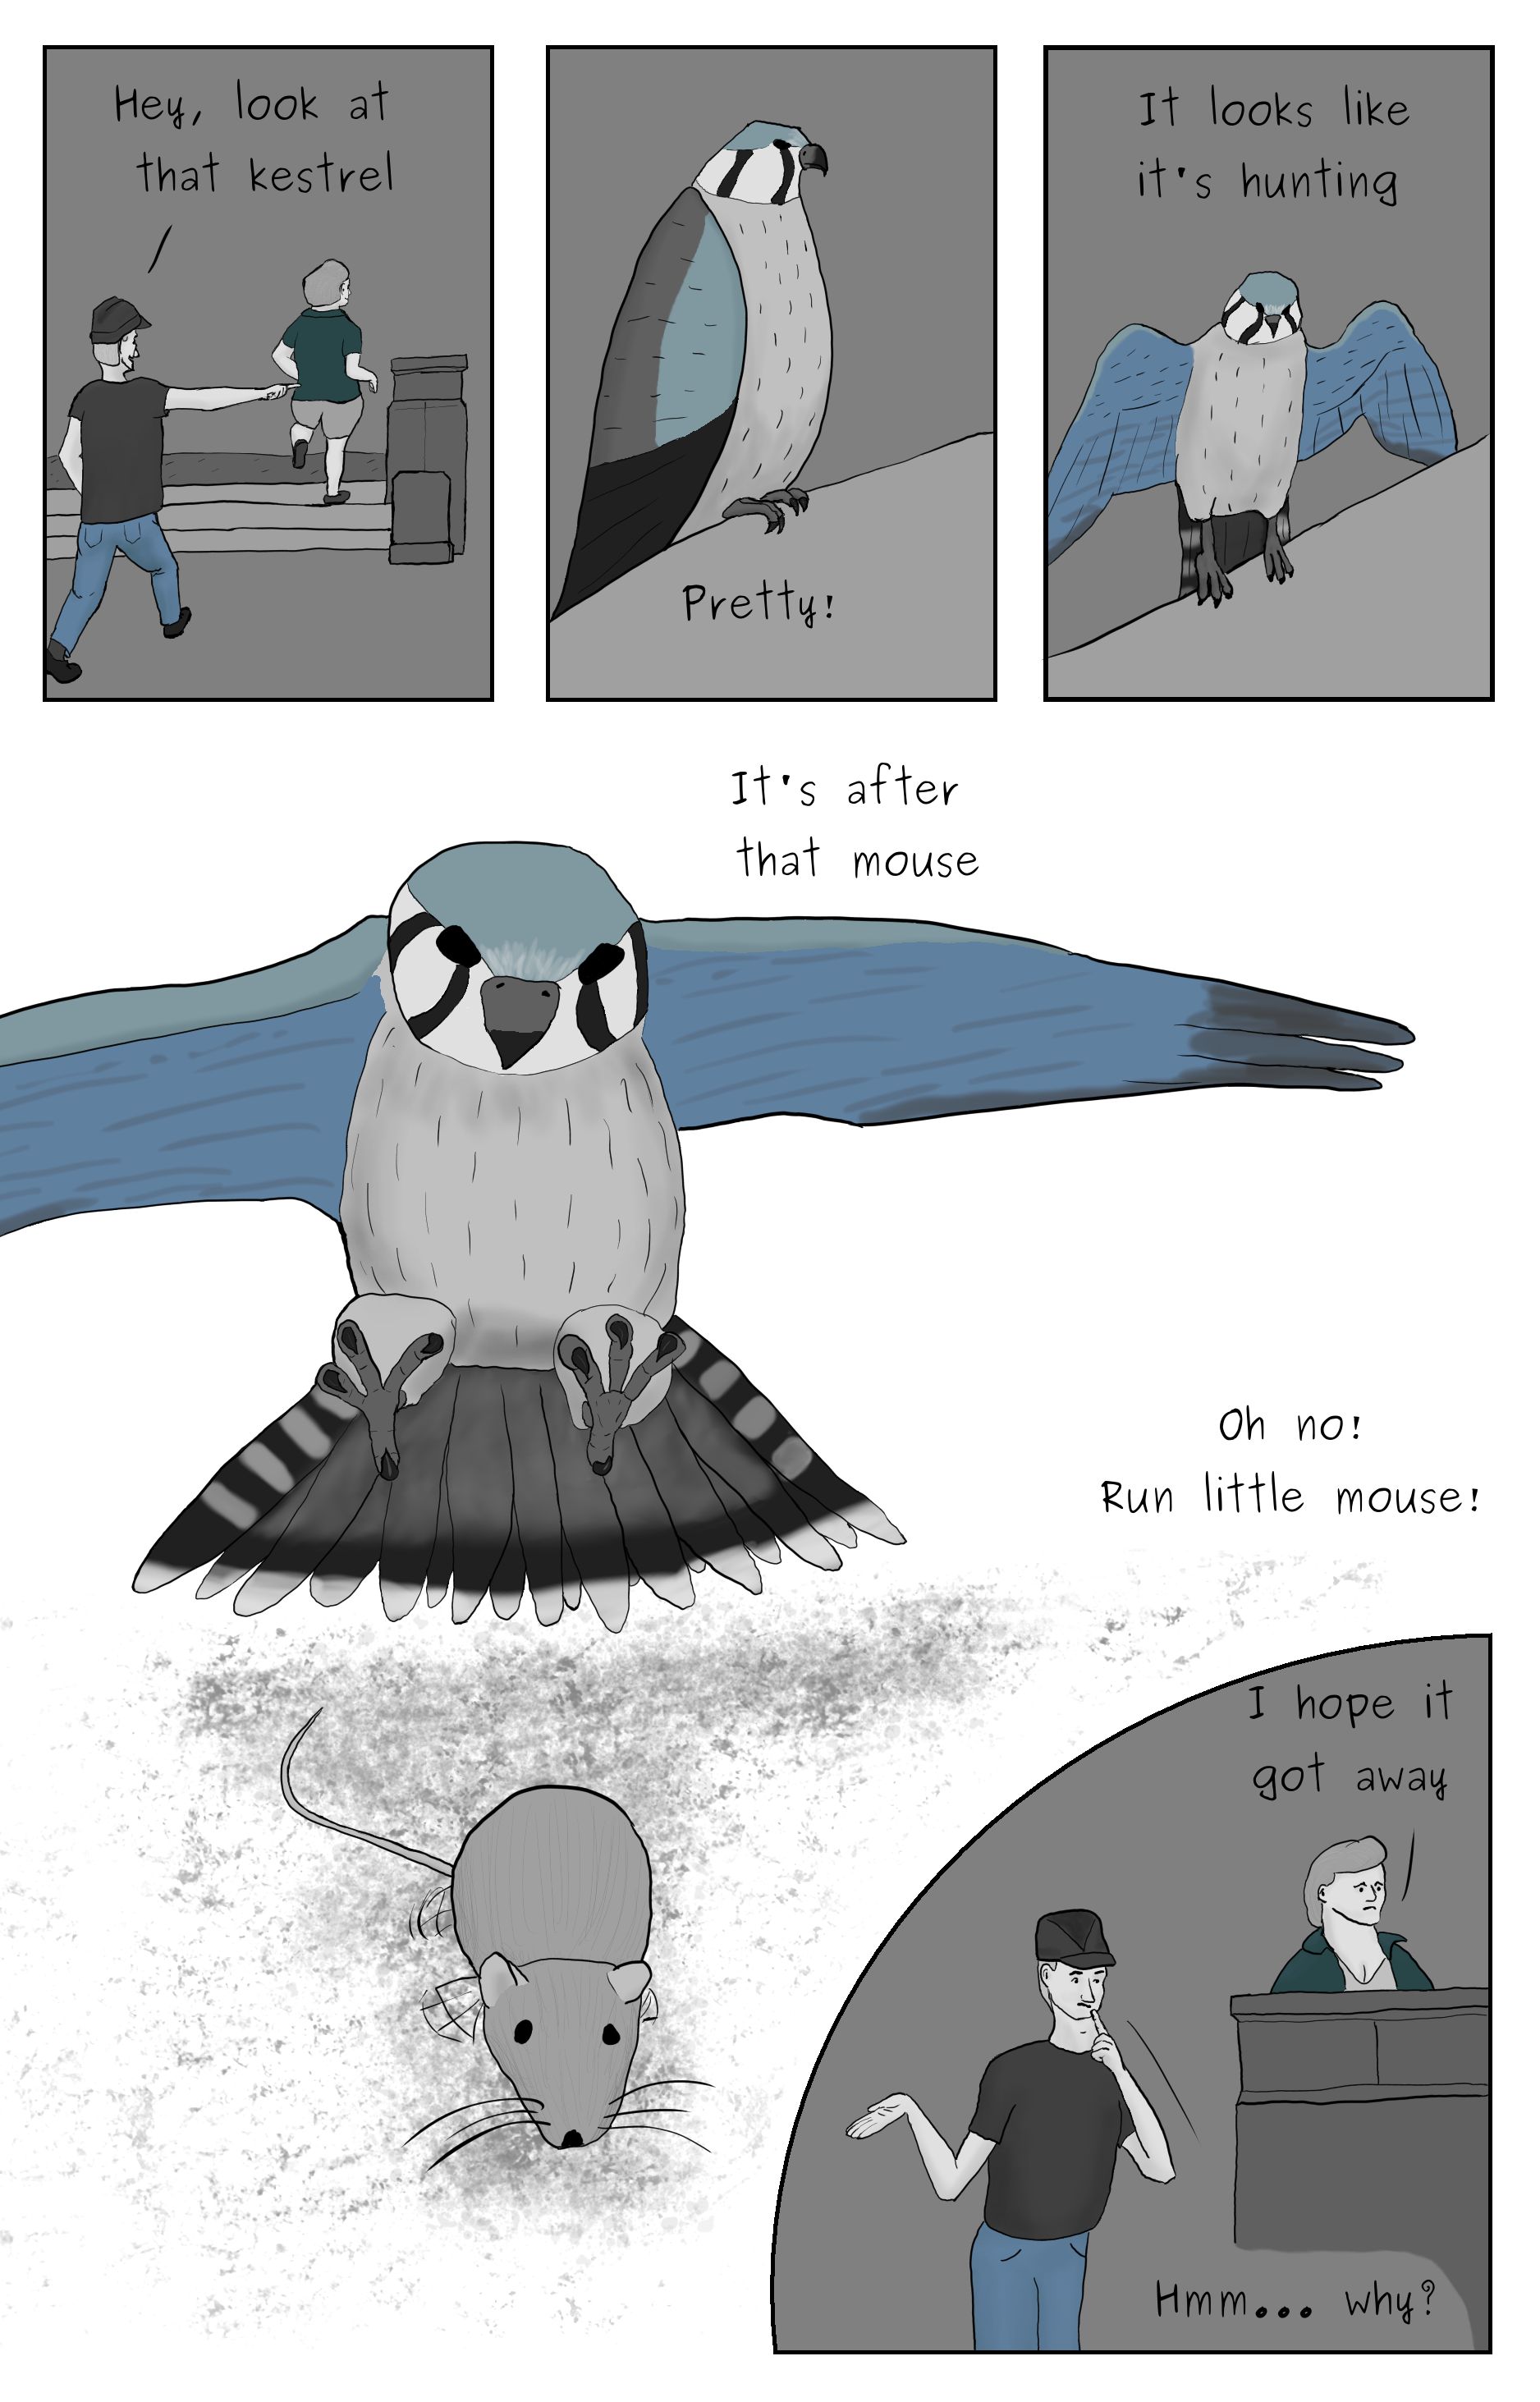 A comic featuring Phillip and Shannon spoting a Kestral, that kestral swooping after a mouse, and Phillip and Shannon starting to discuss the safty of the mouse.